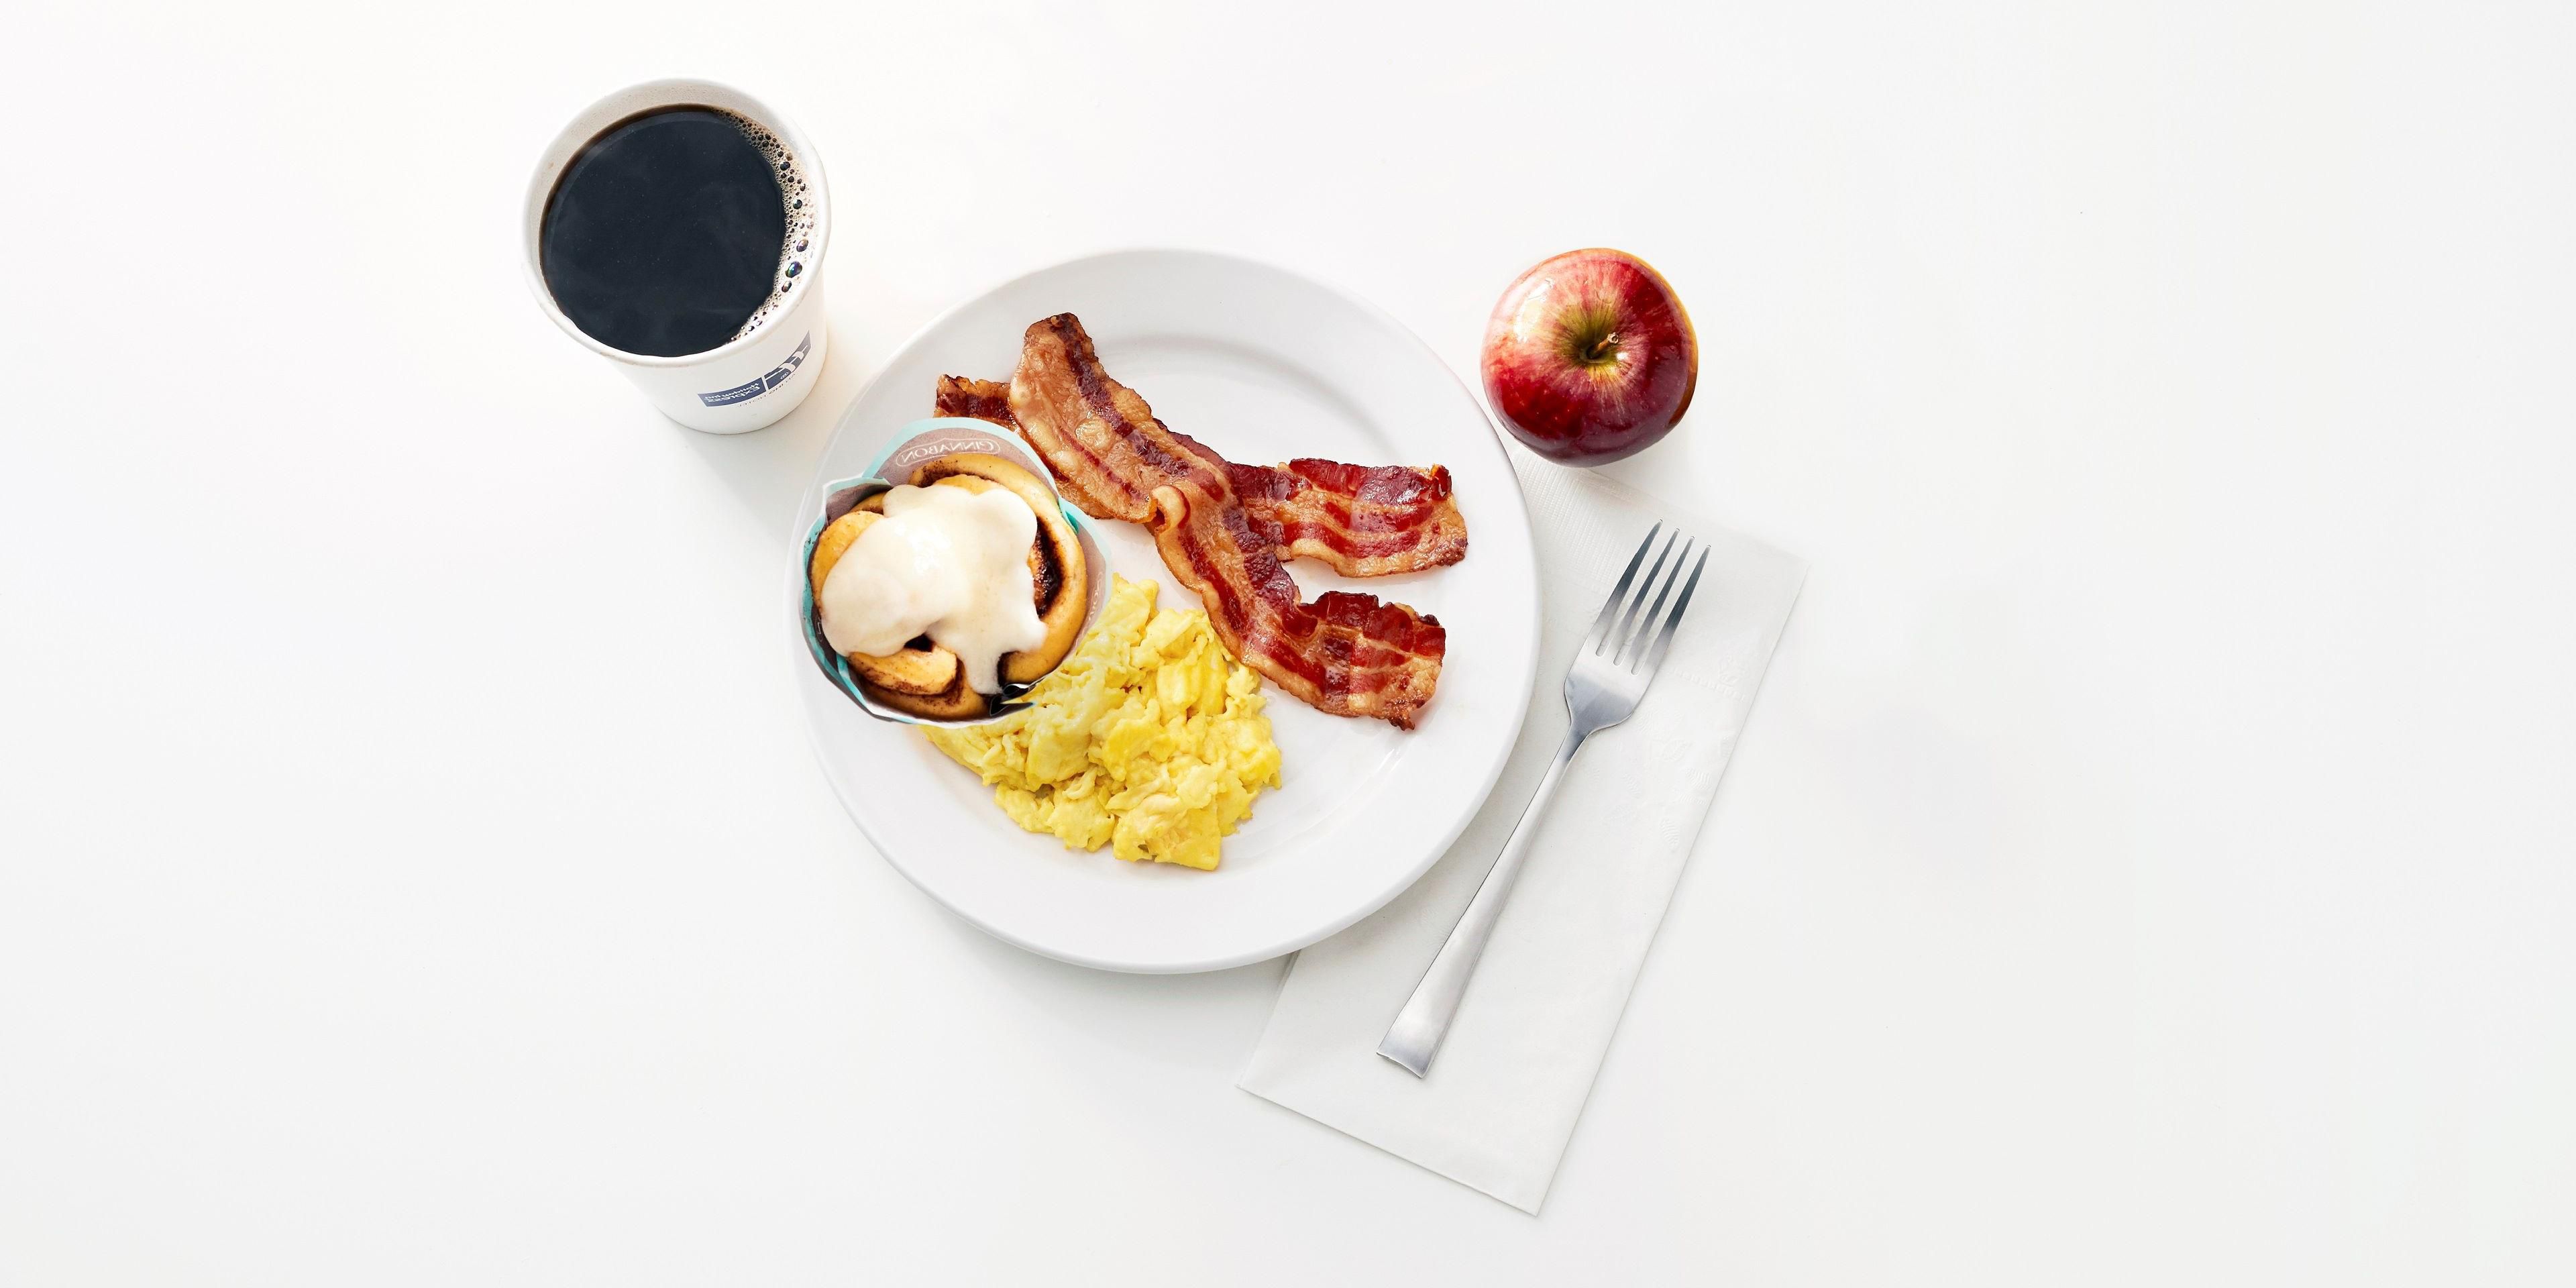 Kick start your day with our free Express Start Breakfast, with grab ‘n’ go options and favorites such as eggs and bacon, hot pancakes, our signature cinnamon rolls and fresh coffee. Offered from 6AM to 9:30AM